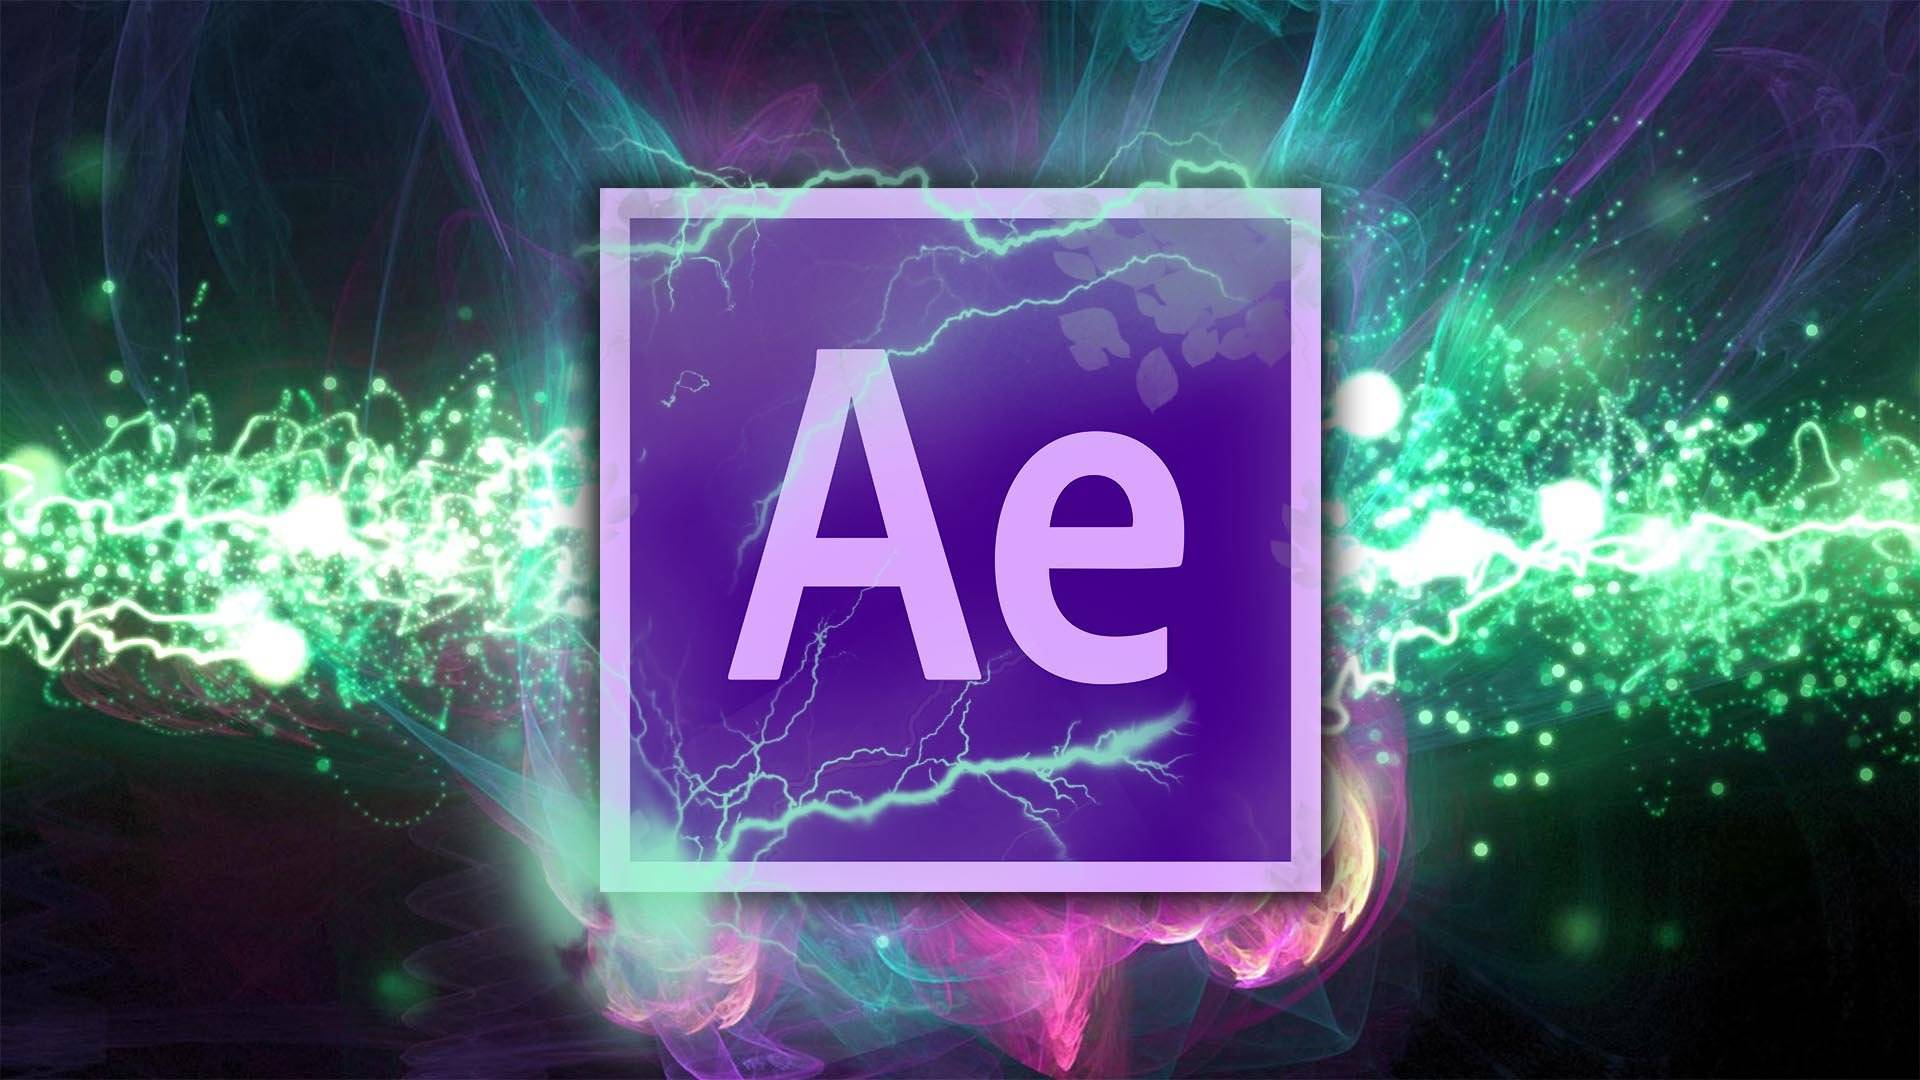 adobe after effects cc 2019 crack free download